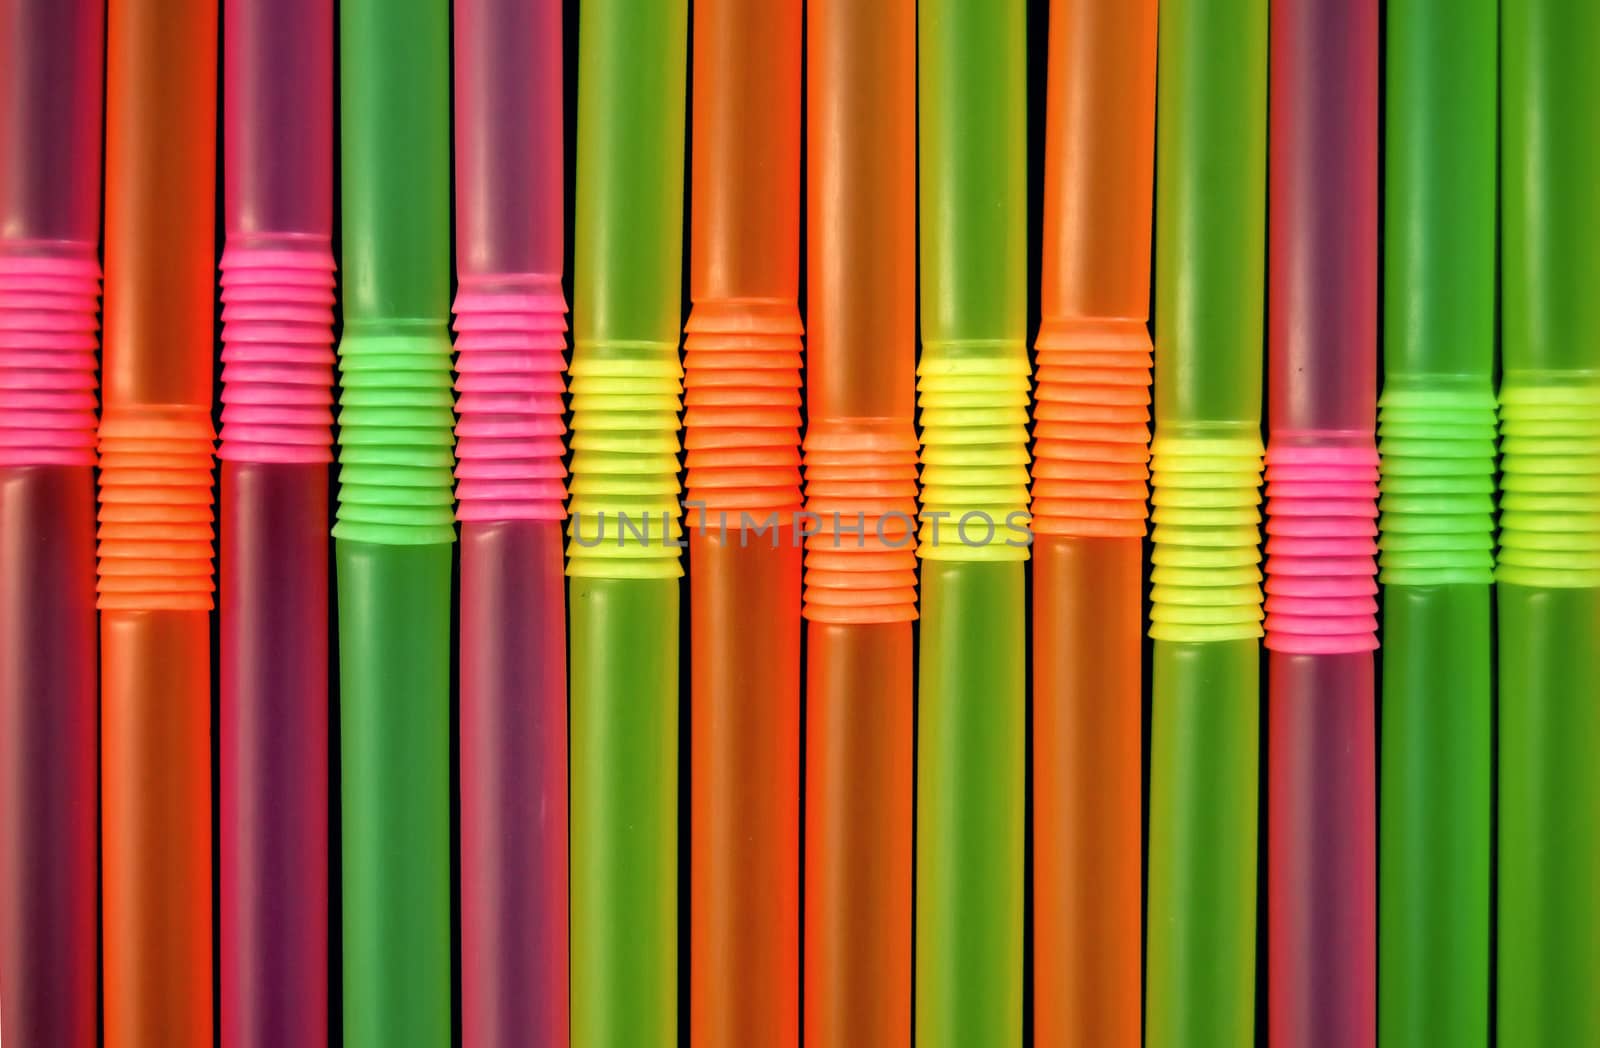 Drinking straws against a black background. Abstract pattern.